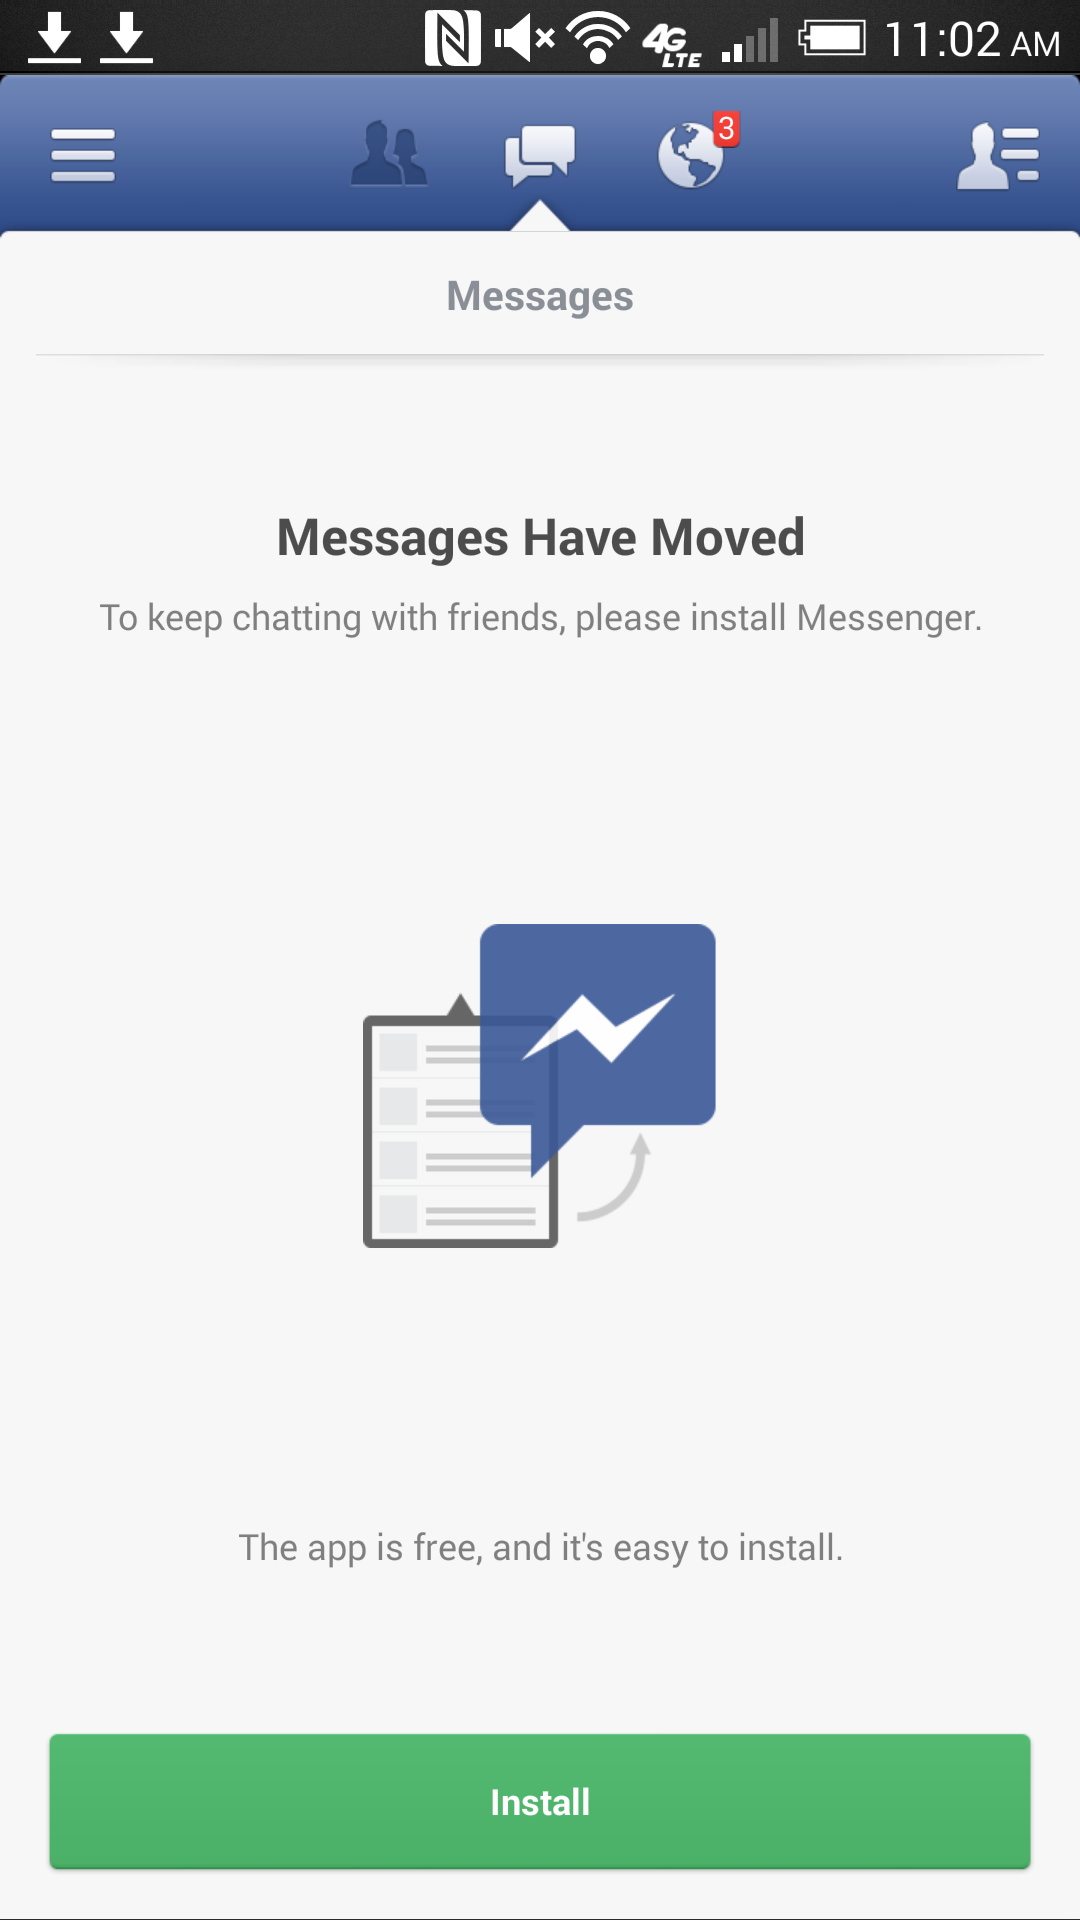 web page - N 40 Messages Messages Have Moved To keep chatting with friends, please install Messenger. The app is free, and it's easy to install. Install